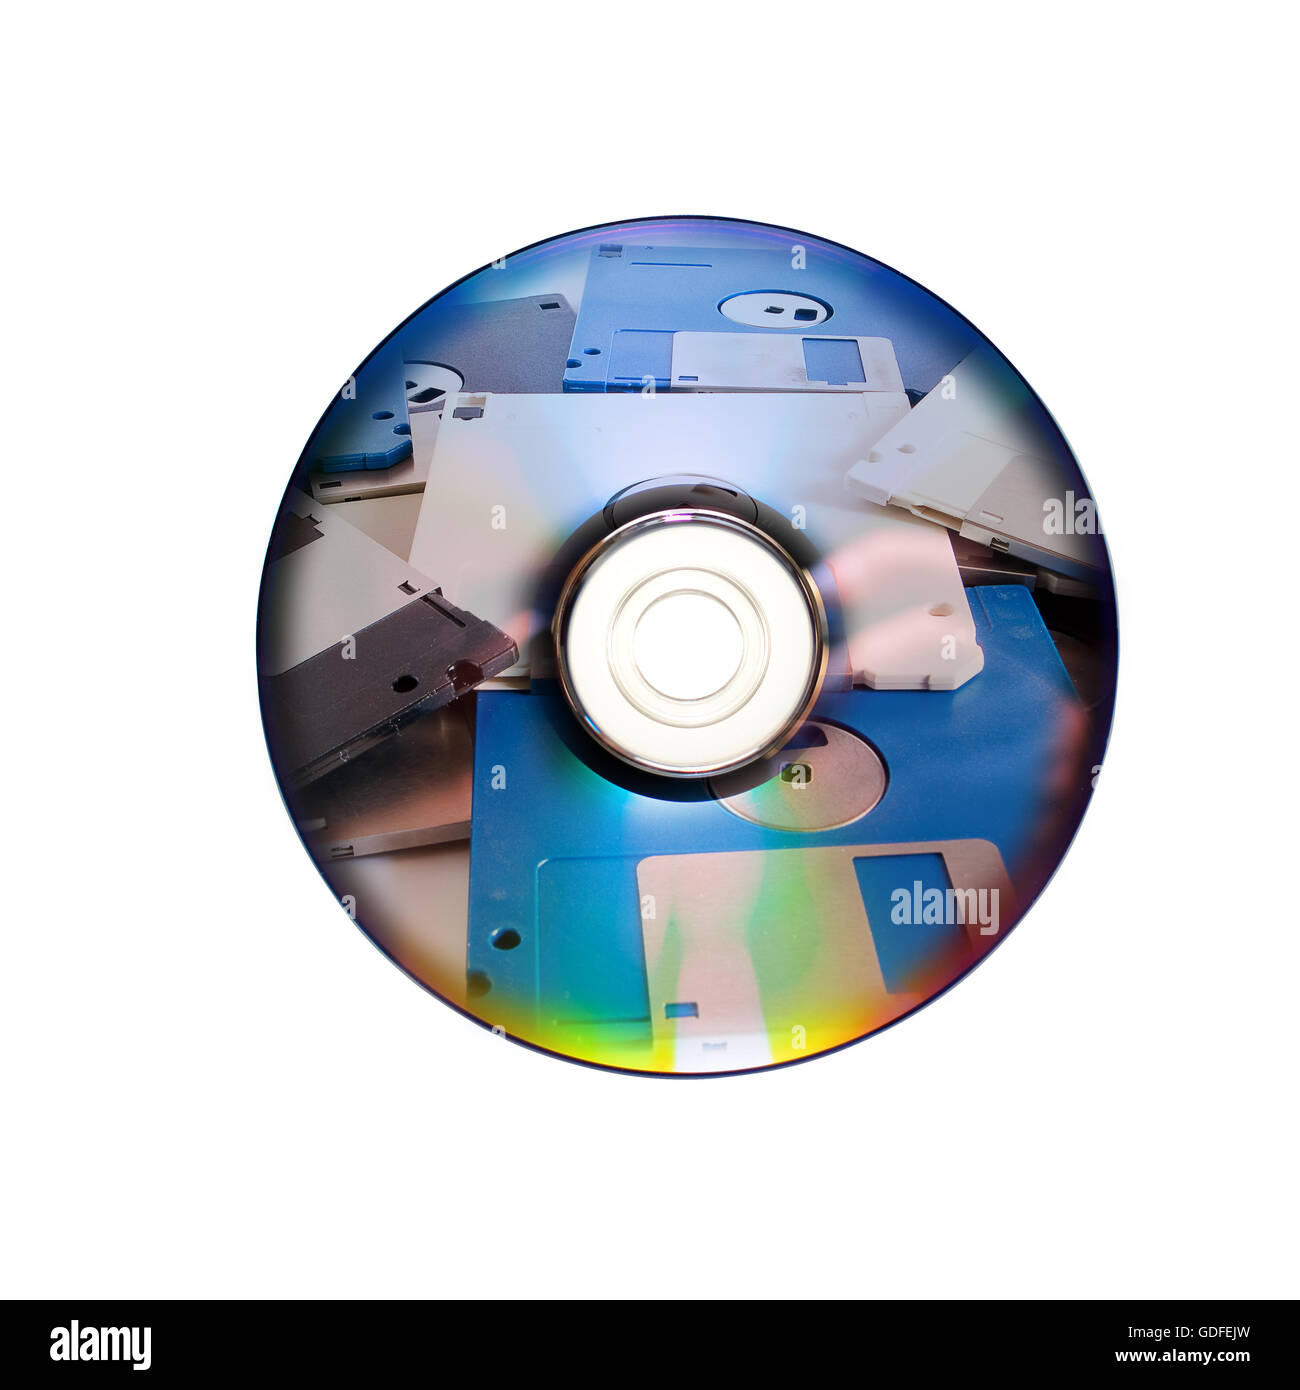 Dvd or cd and old floppy disk inside Stock Photo